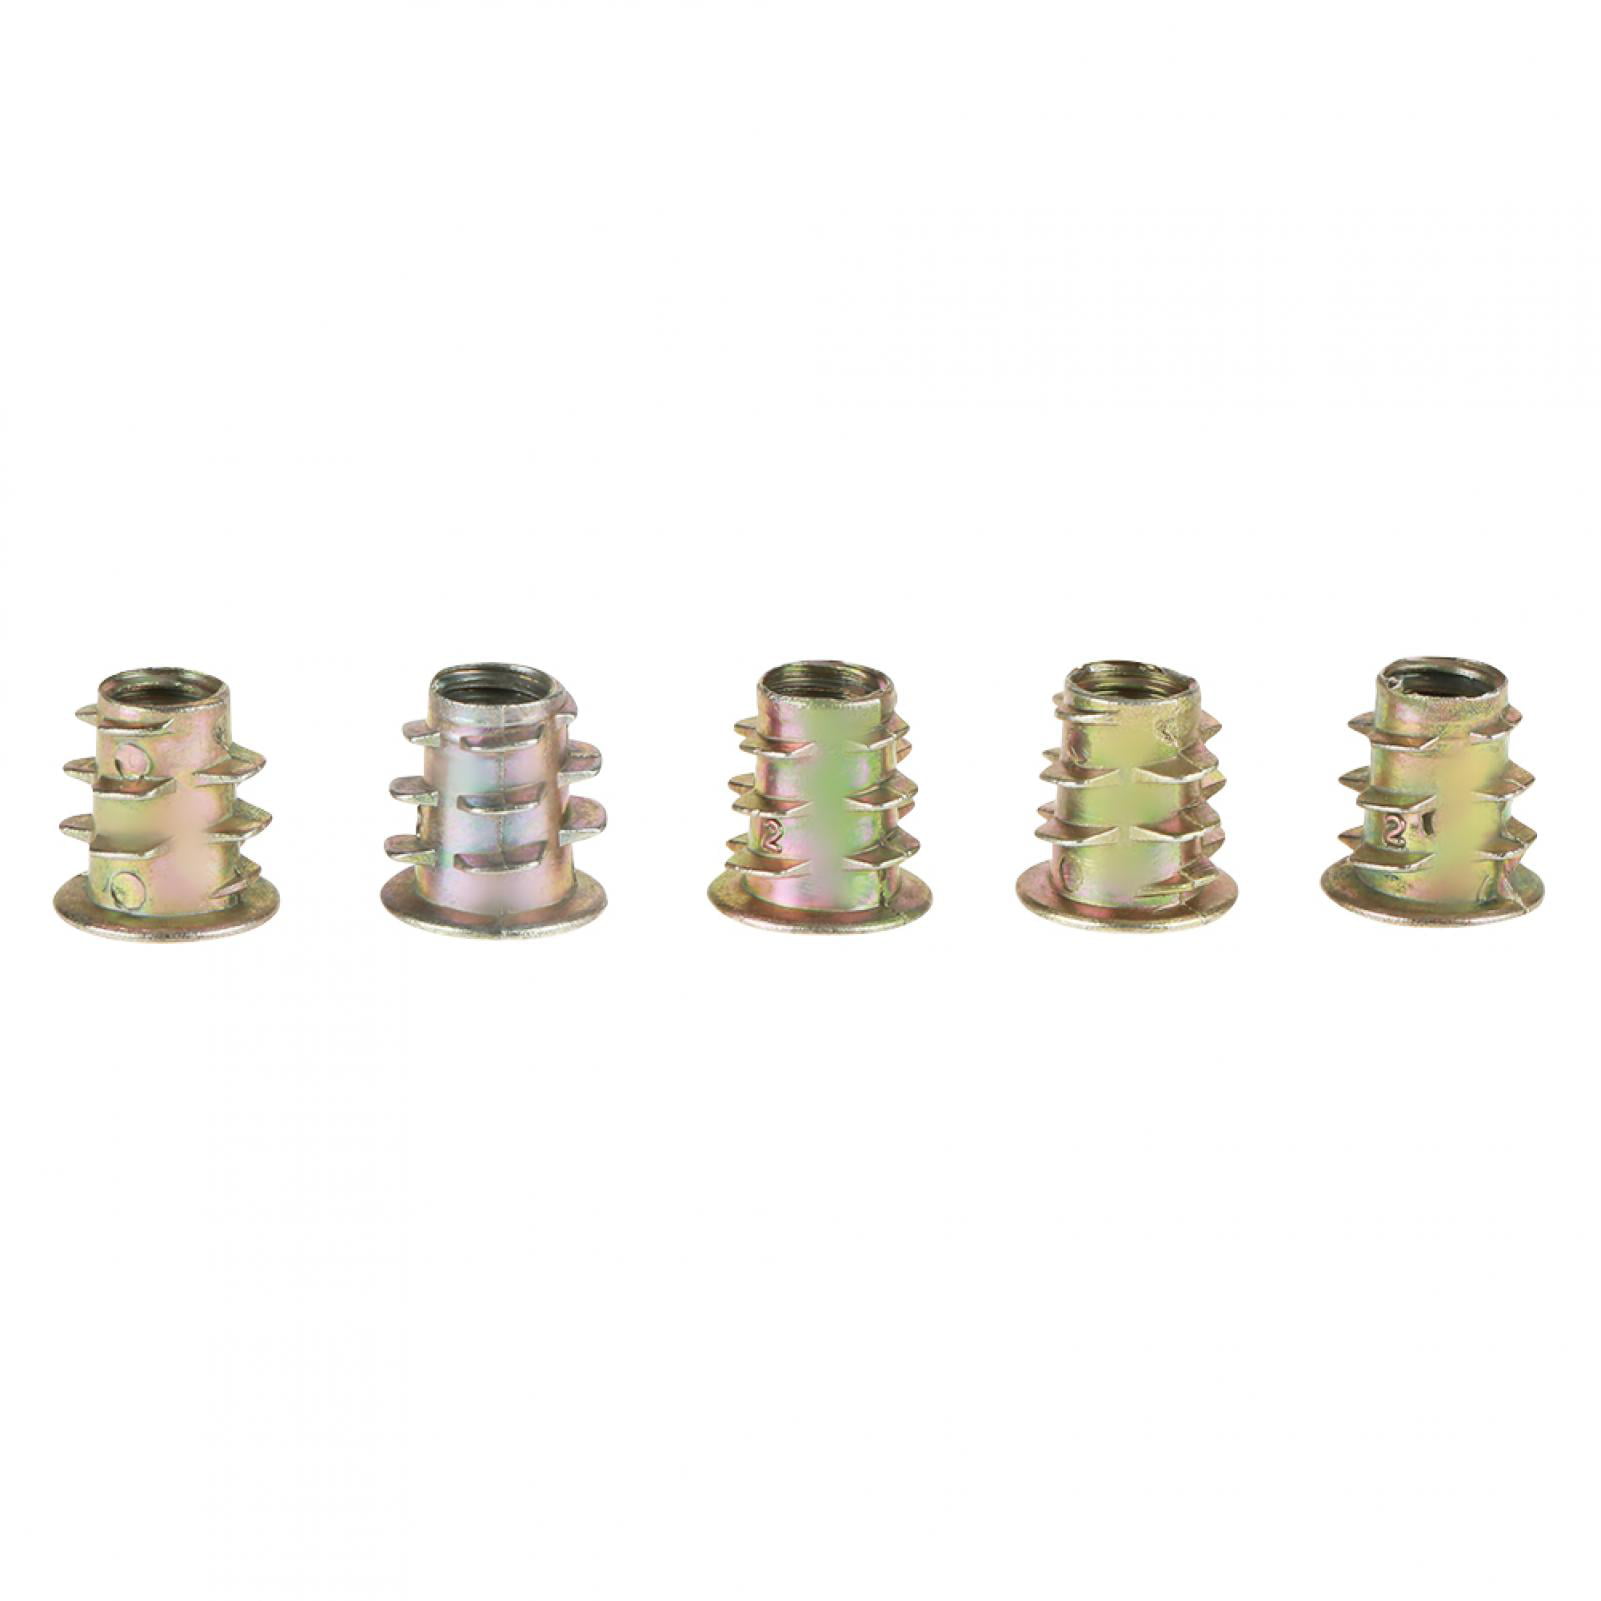 Details about   M 5*10mm Zinc Alloy Hex Drive Head Furniture Nuts Threaded for Wood Insert 